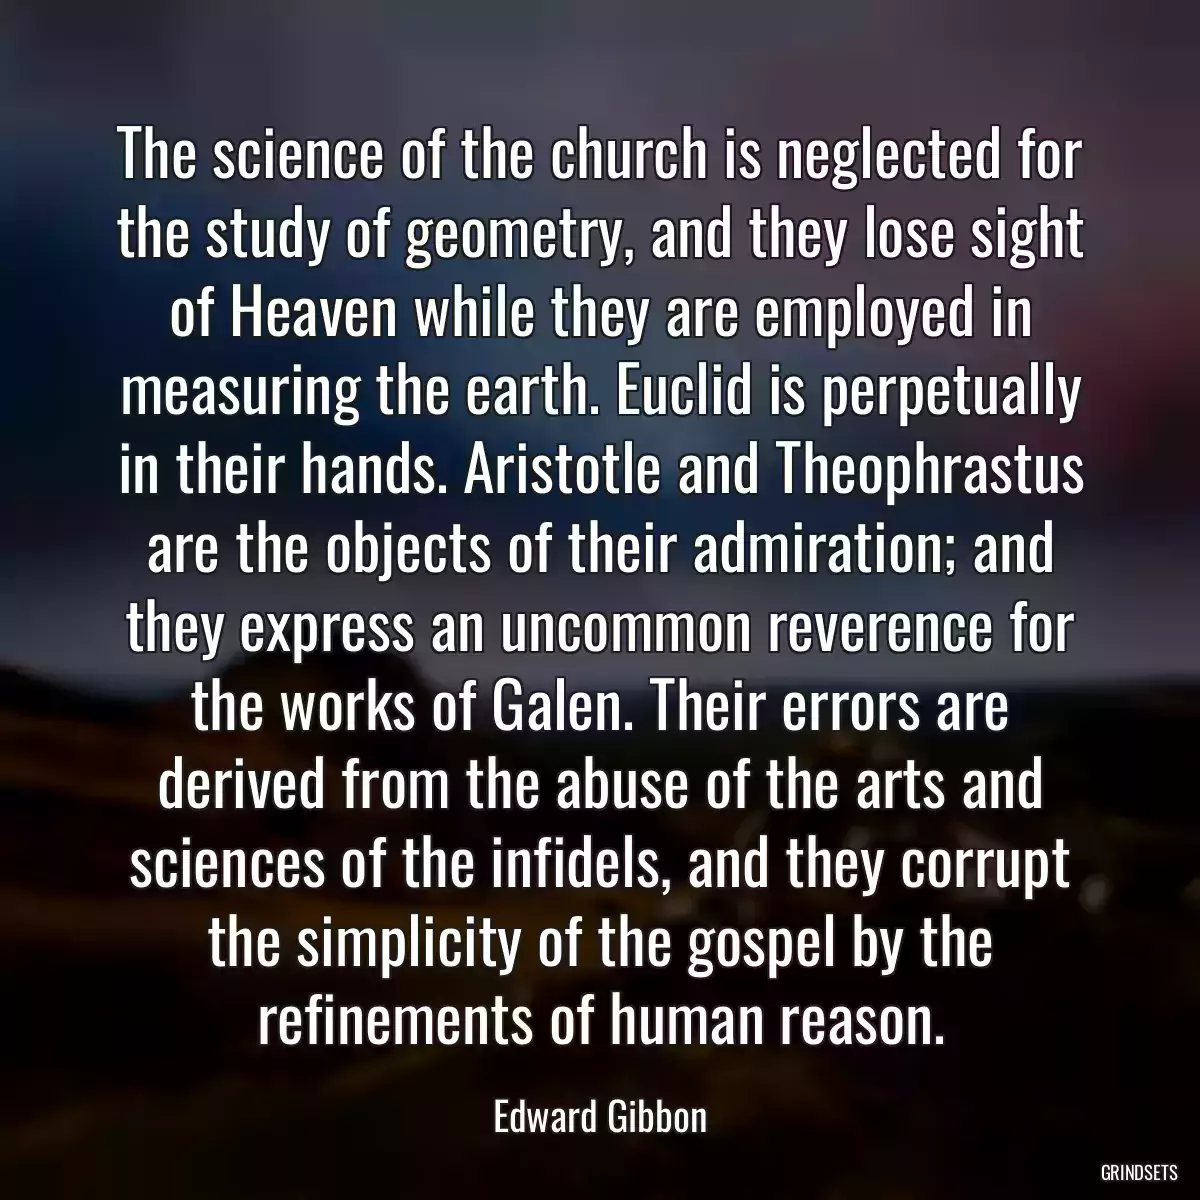 The science of the church is neglected for the study of geometry, and they lose sight of Heaven while they are employed in measuring the earth. Euclid is perpetually in their hands. Aristotle and Theophrastus are the objects of their admiration; and they express an uncommon reverence for the works of Galen. Their errors are derived from the abuse of the arts and sciences of the infidels, and they corrupt the simplicity of the gospel by the refinements of human reason.